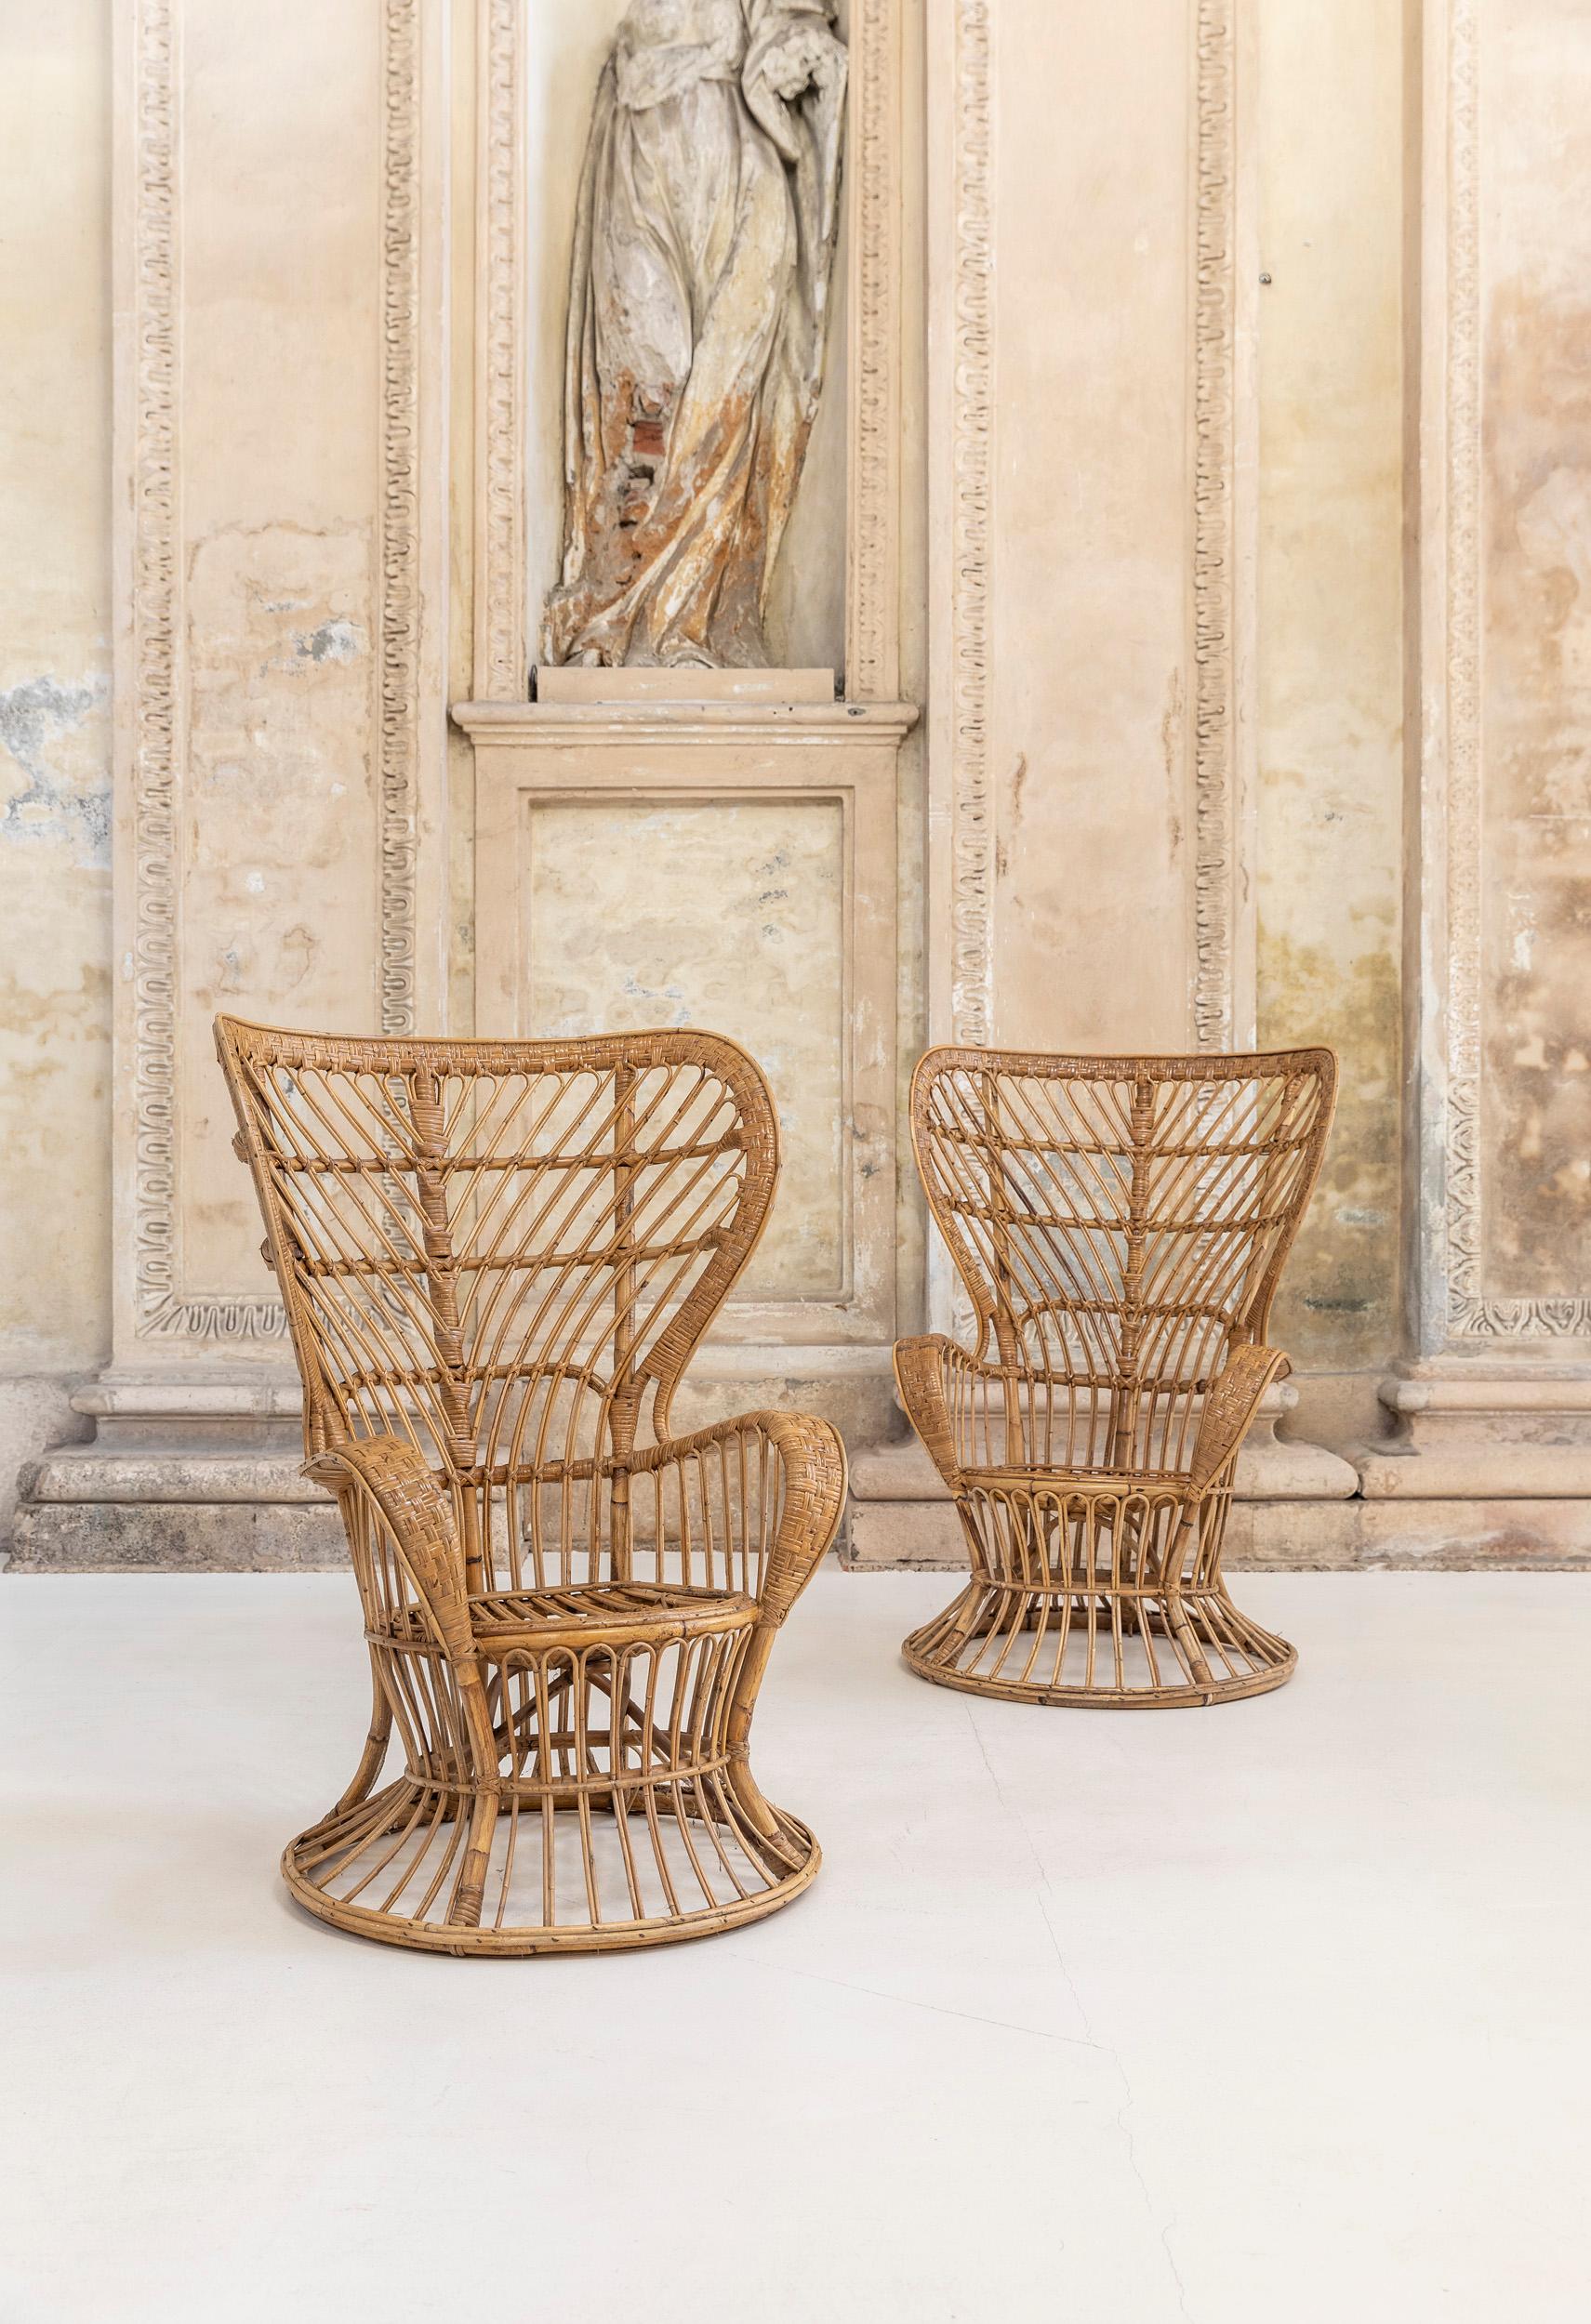 Mid-Century Modern vintage armchairs or wingback chairs made of stained rattan by Lio Carminati and Gio Ponti.
Designed in 1948 in Italy and manufactured in the '50s. 
This iconic pieces show a high wingback with a peculiar weave in rattan, the